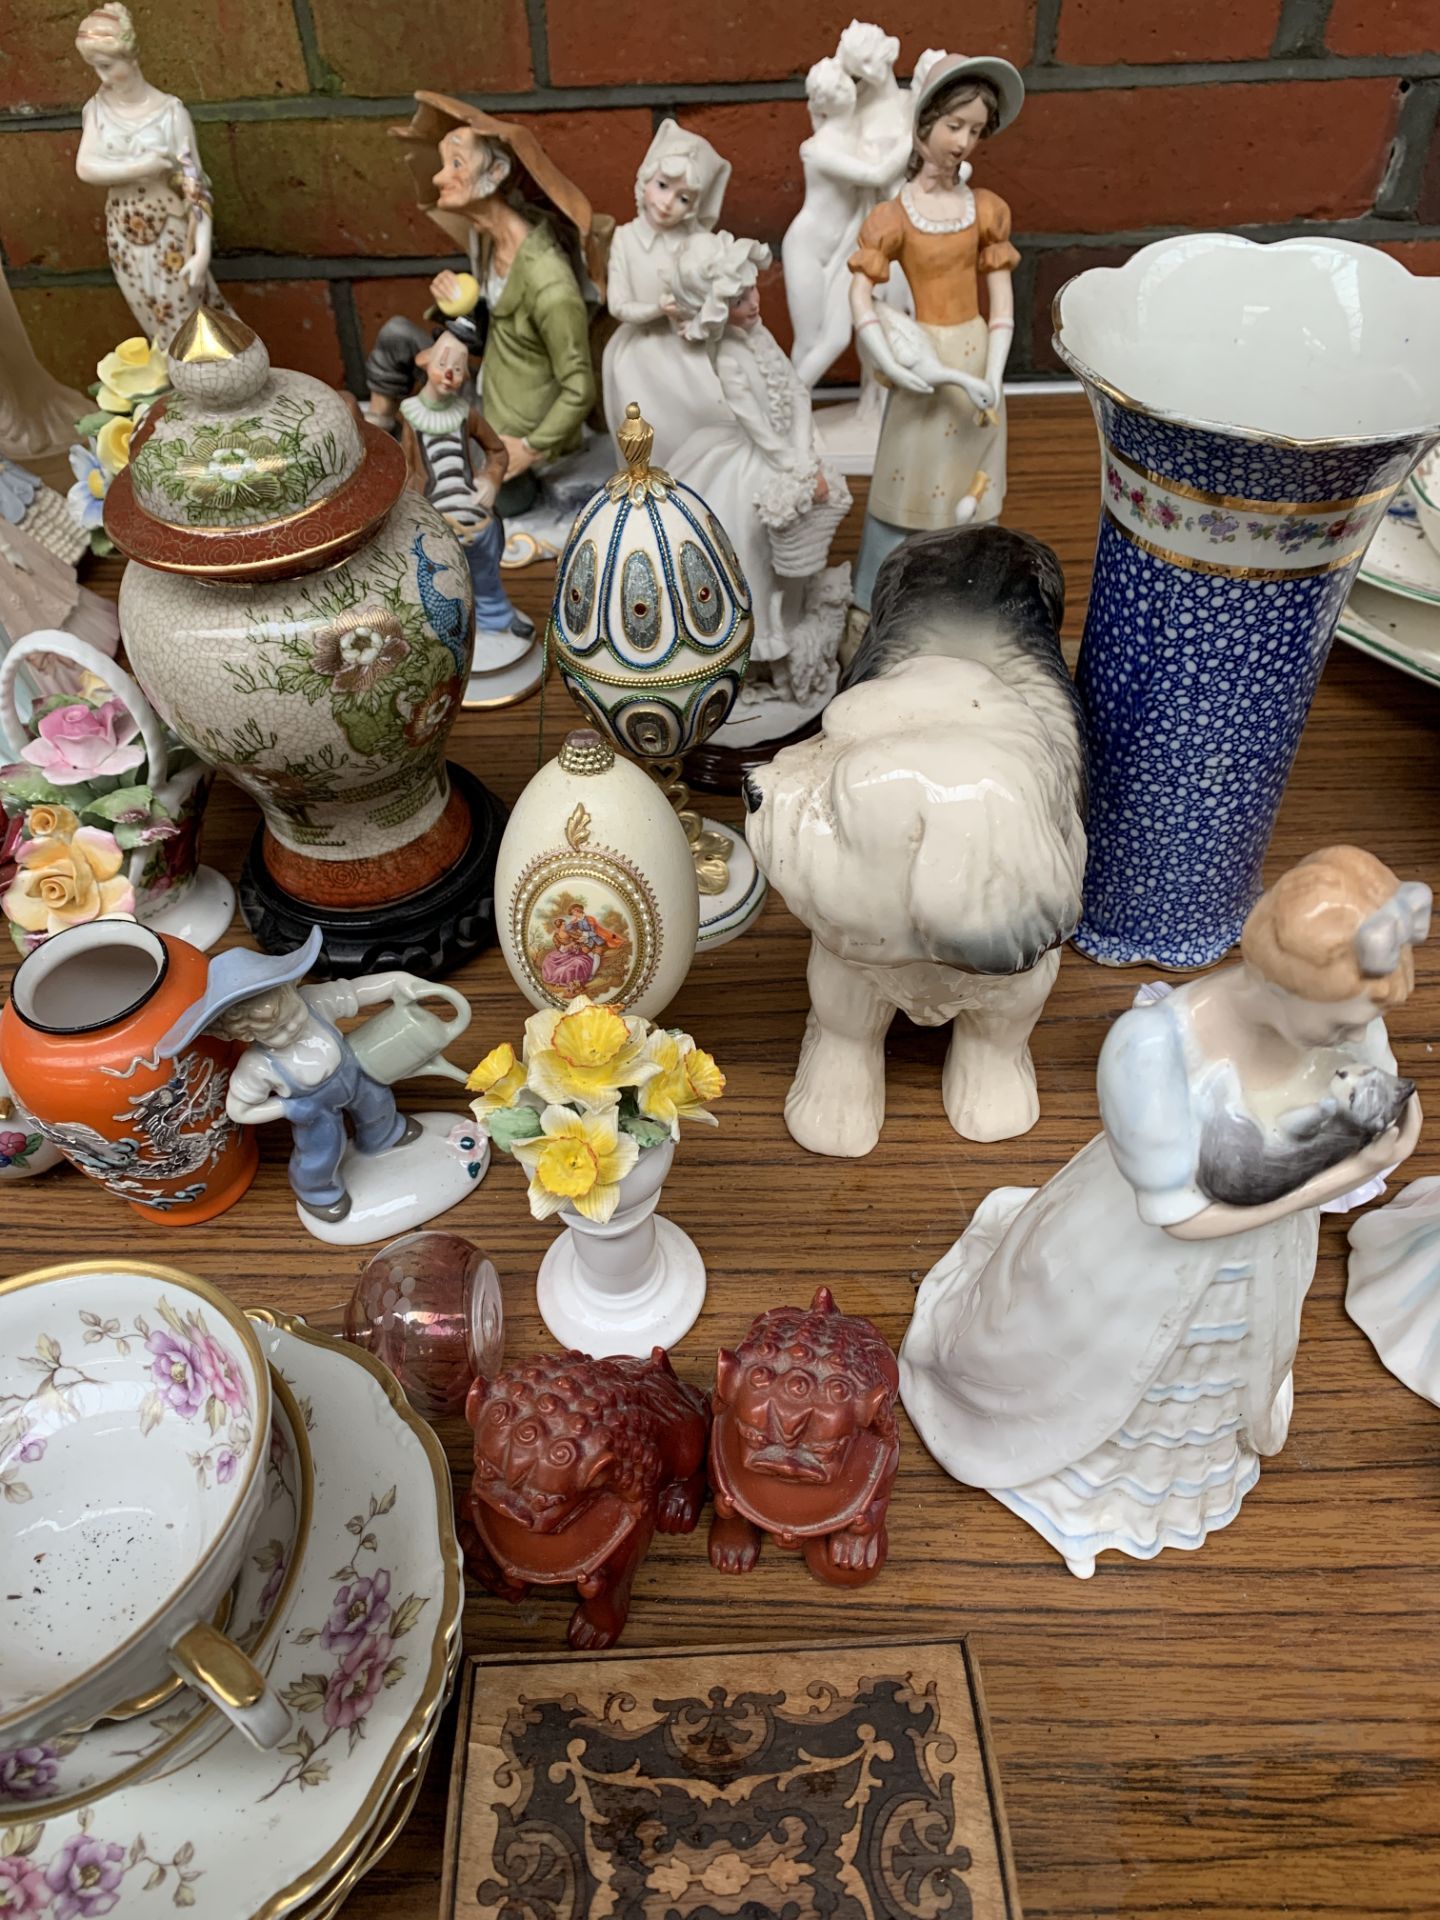 Quantity of china ornaments including Royal Doulton and Coalport - Image 3 of 5